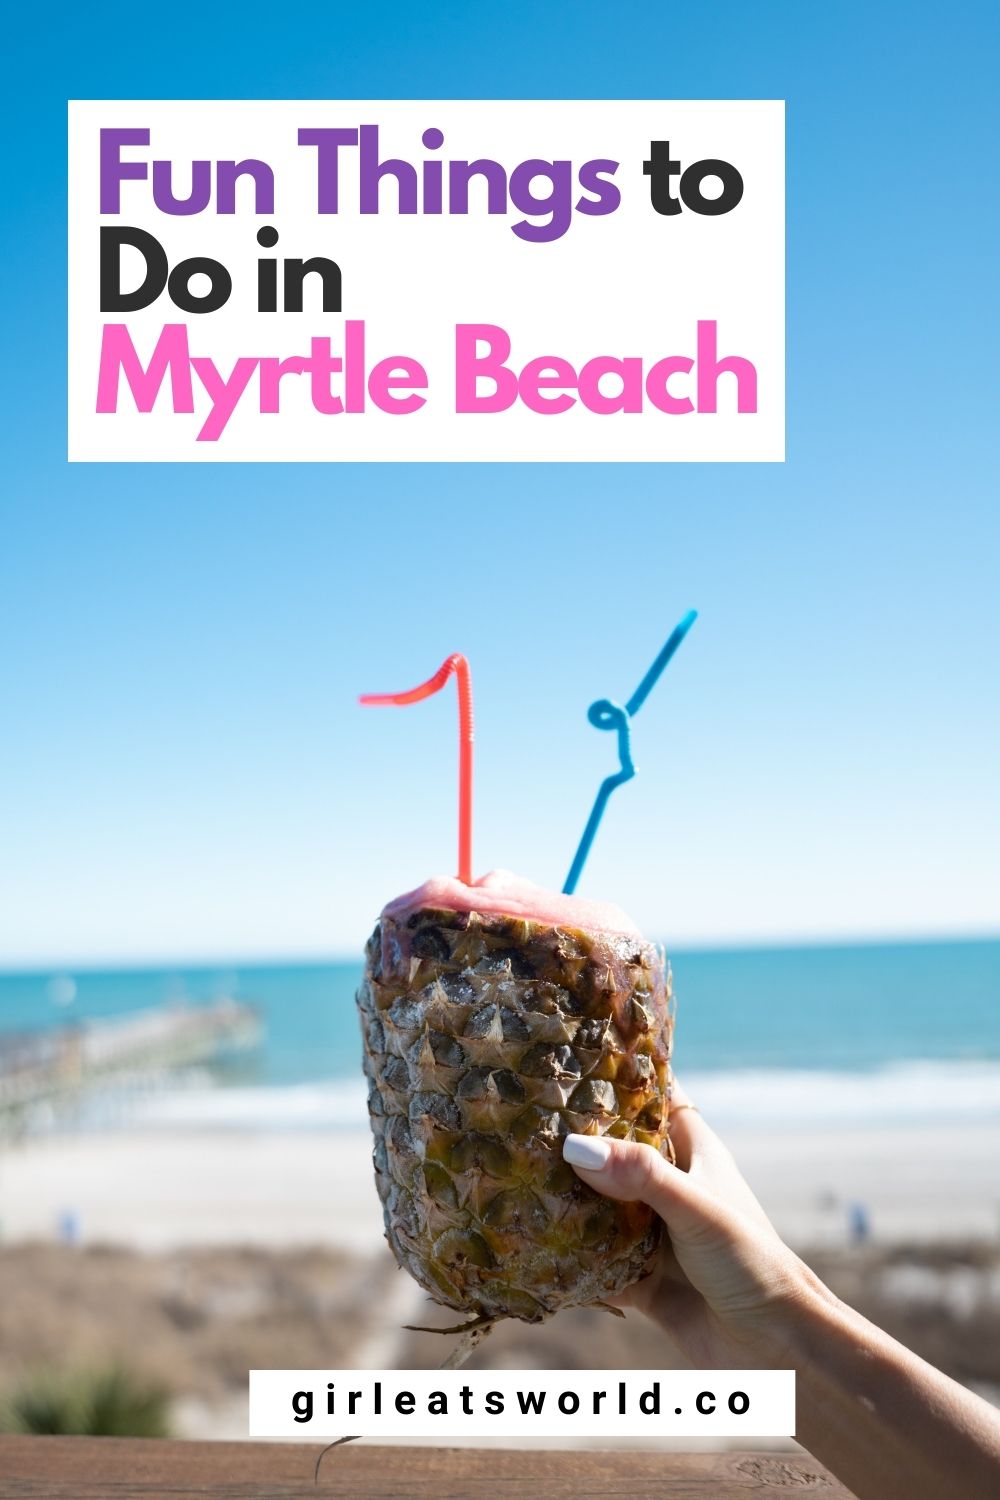 8 Fun Things to Do in Myrtle Beach